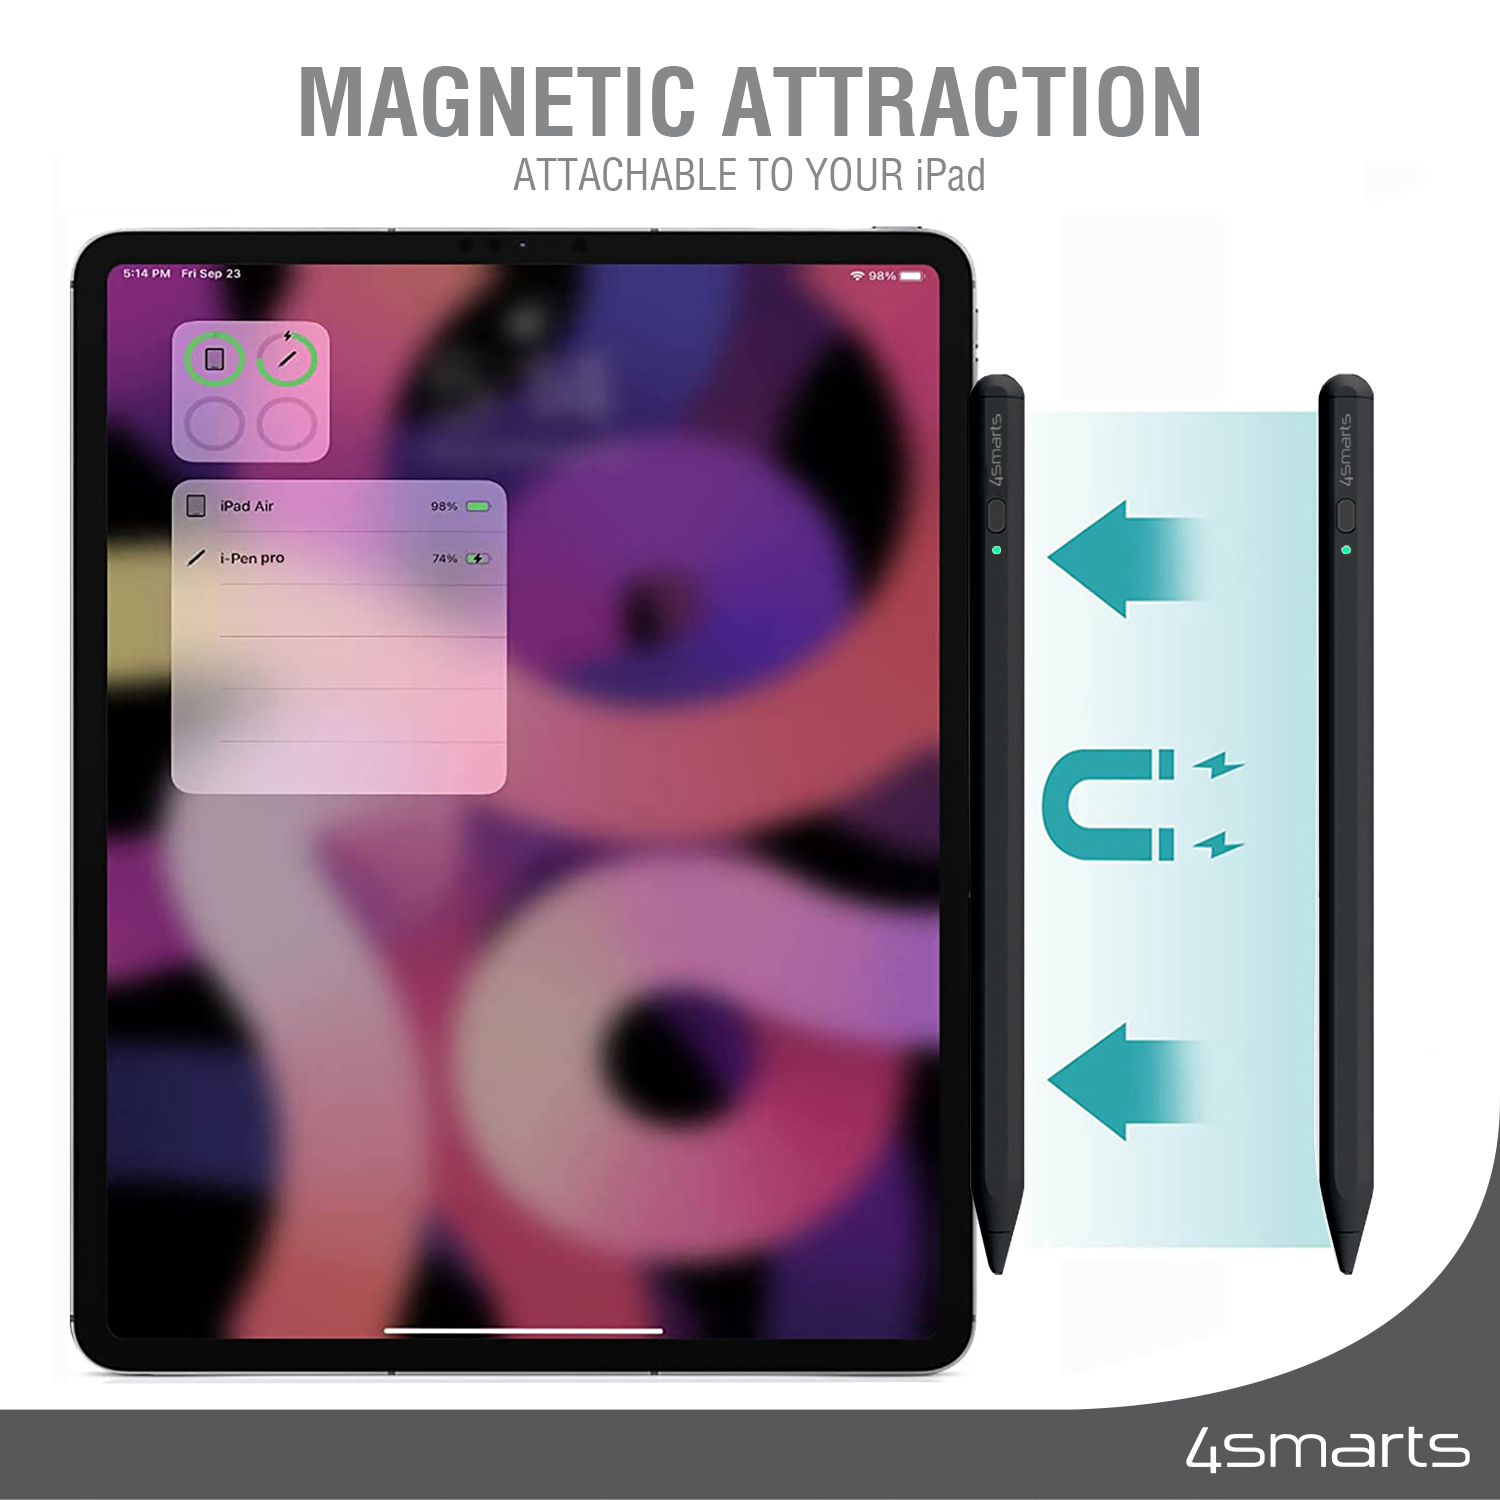 Attach the 4smarts Pencil 3 securely and stably to your iPad with the magnetic holder.